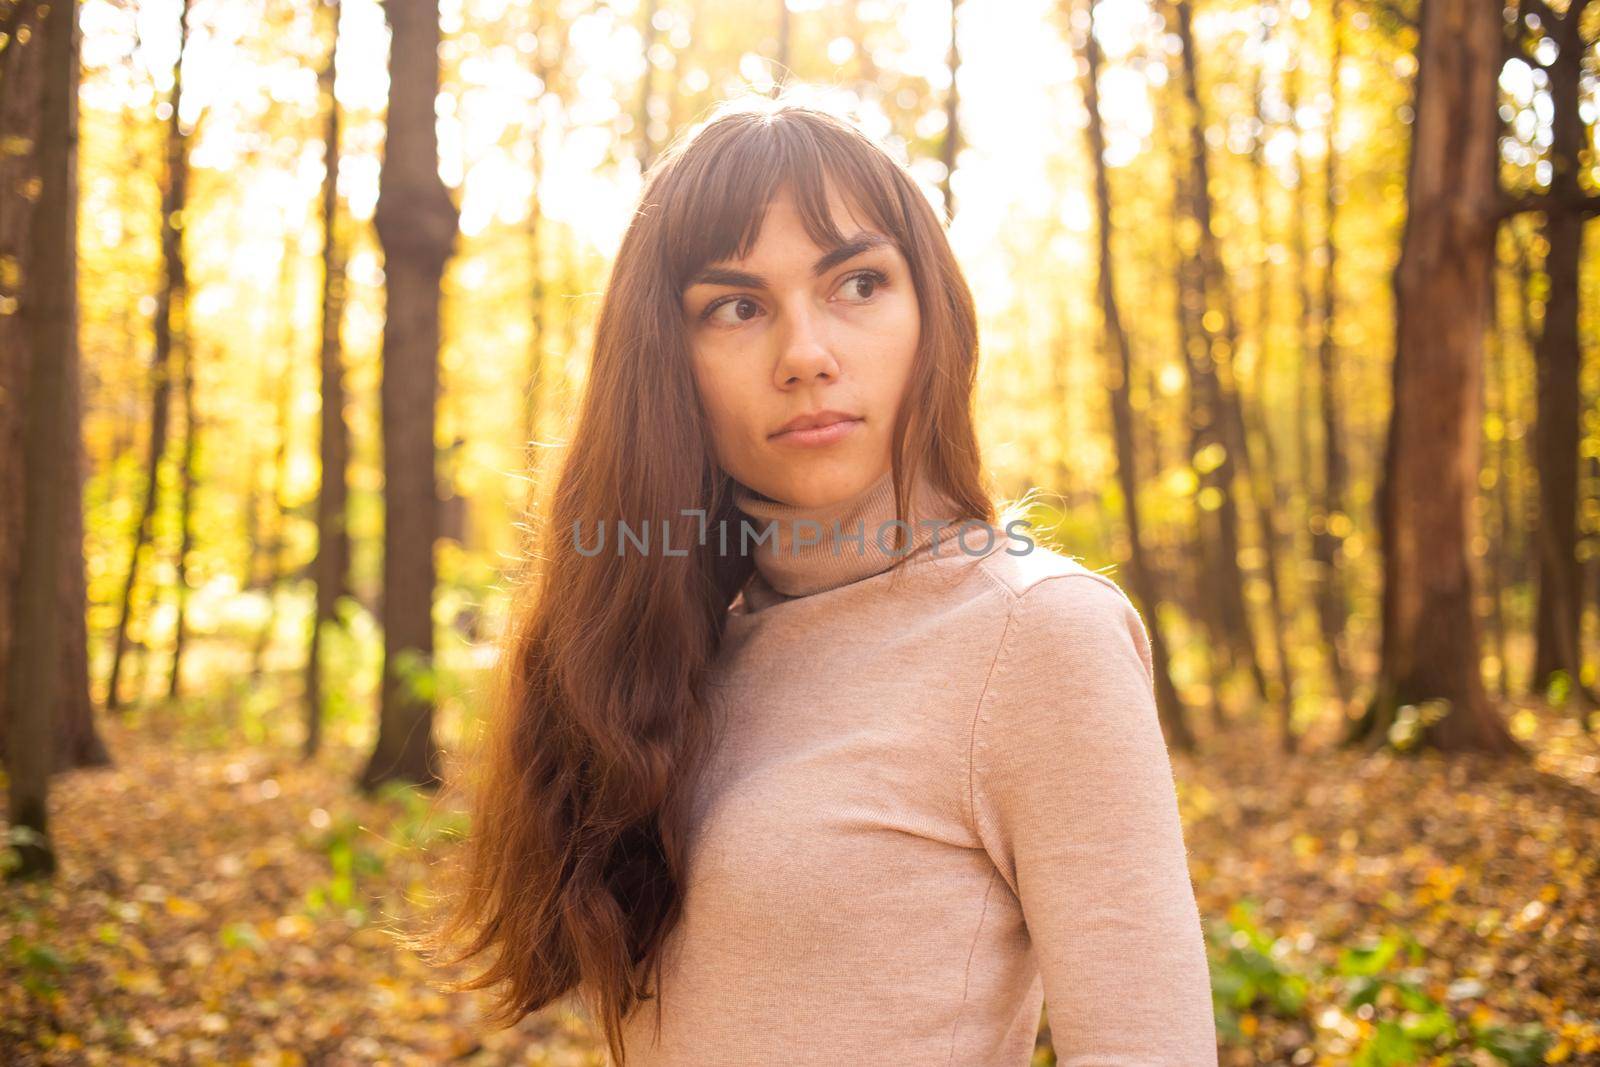 portrait of young beautiful woman in autumn park in sun shines. thinkfull young woman looking away